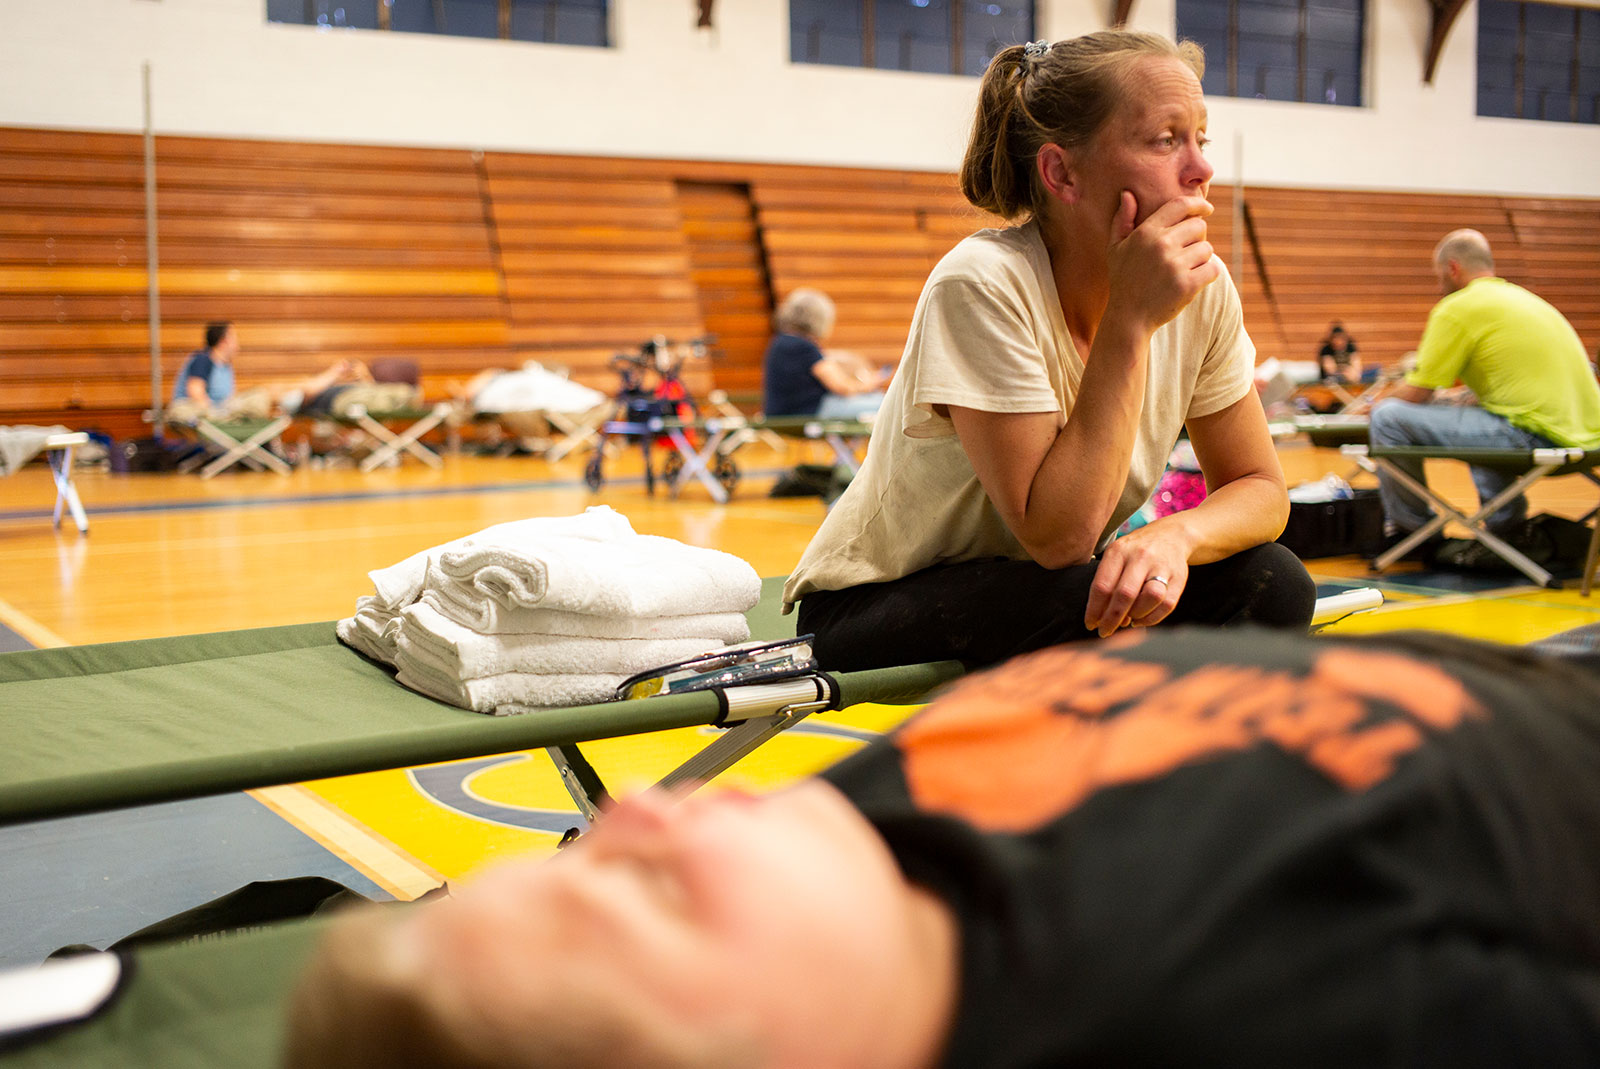 April Stivers, 38, of Lost Creek, Kentucky, takes a moment to herself at Hazard Community & Technical College on July 28, where people displaced by flooding are being taken for shelter.